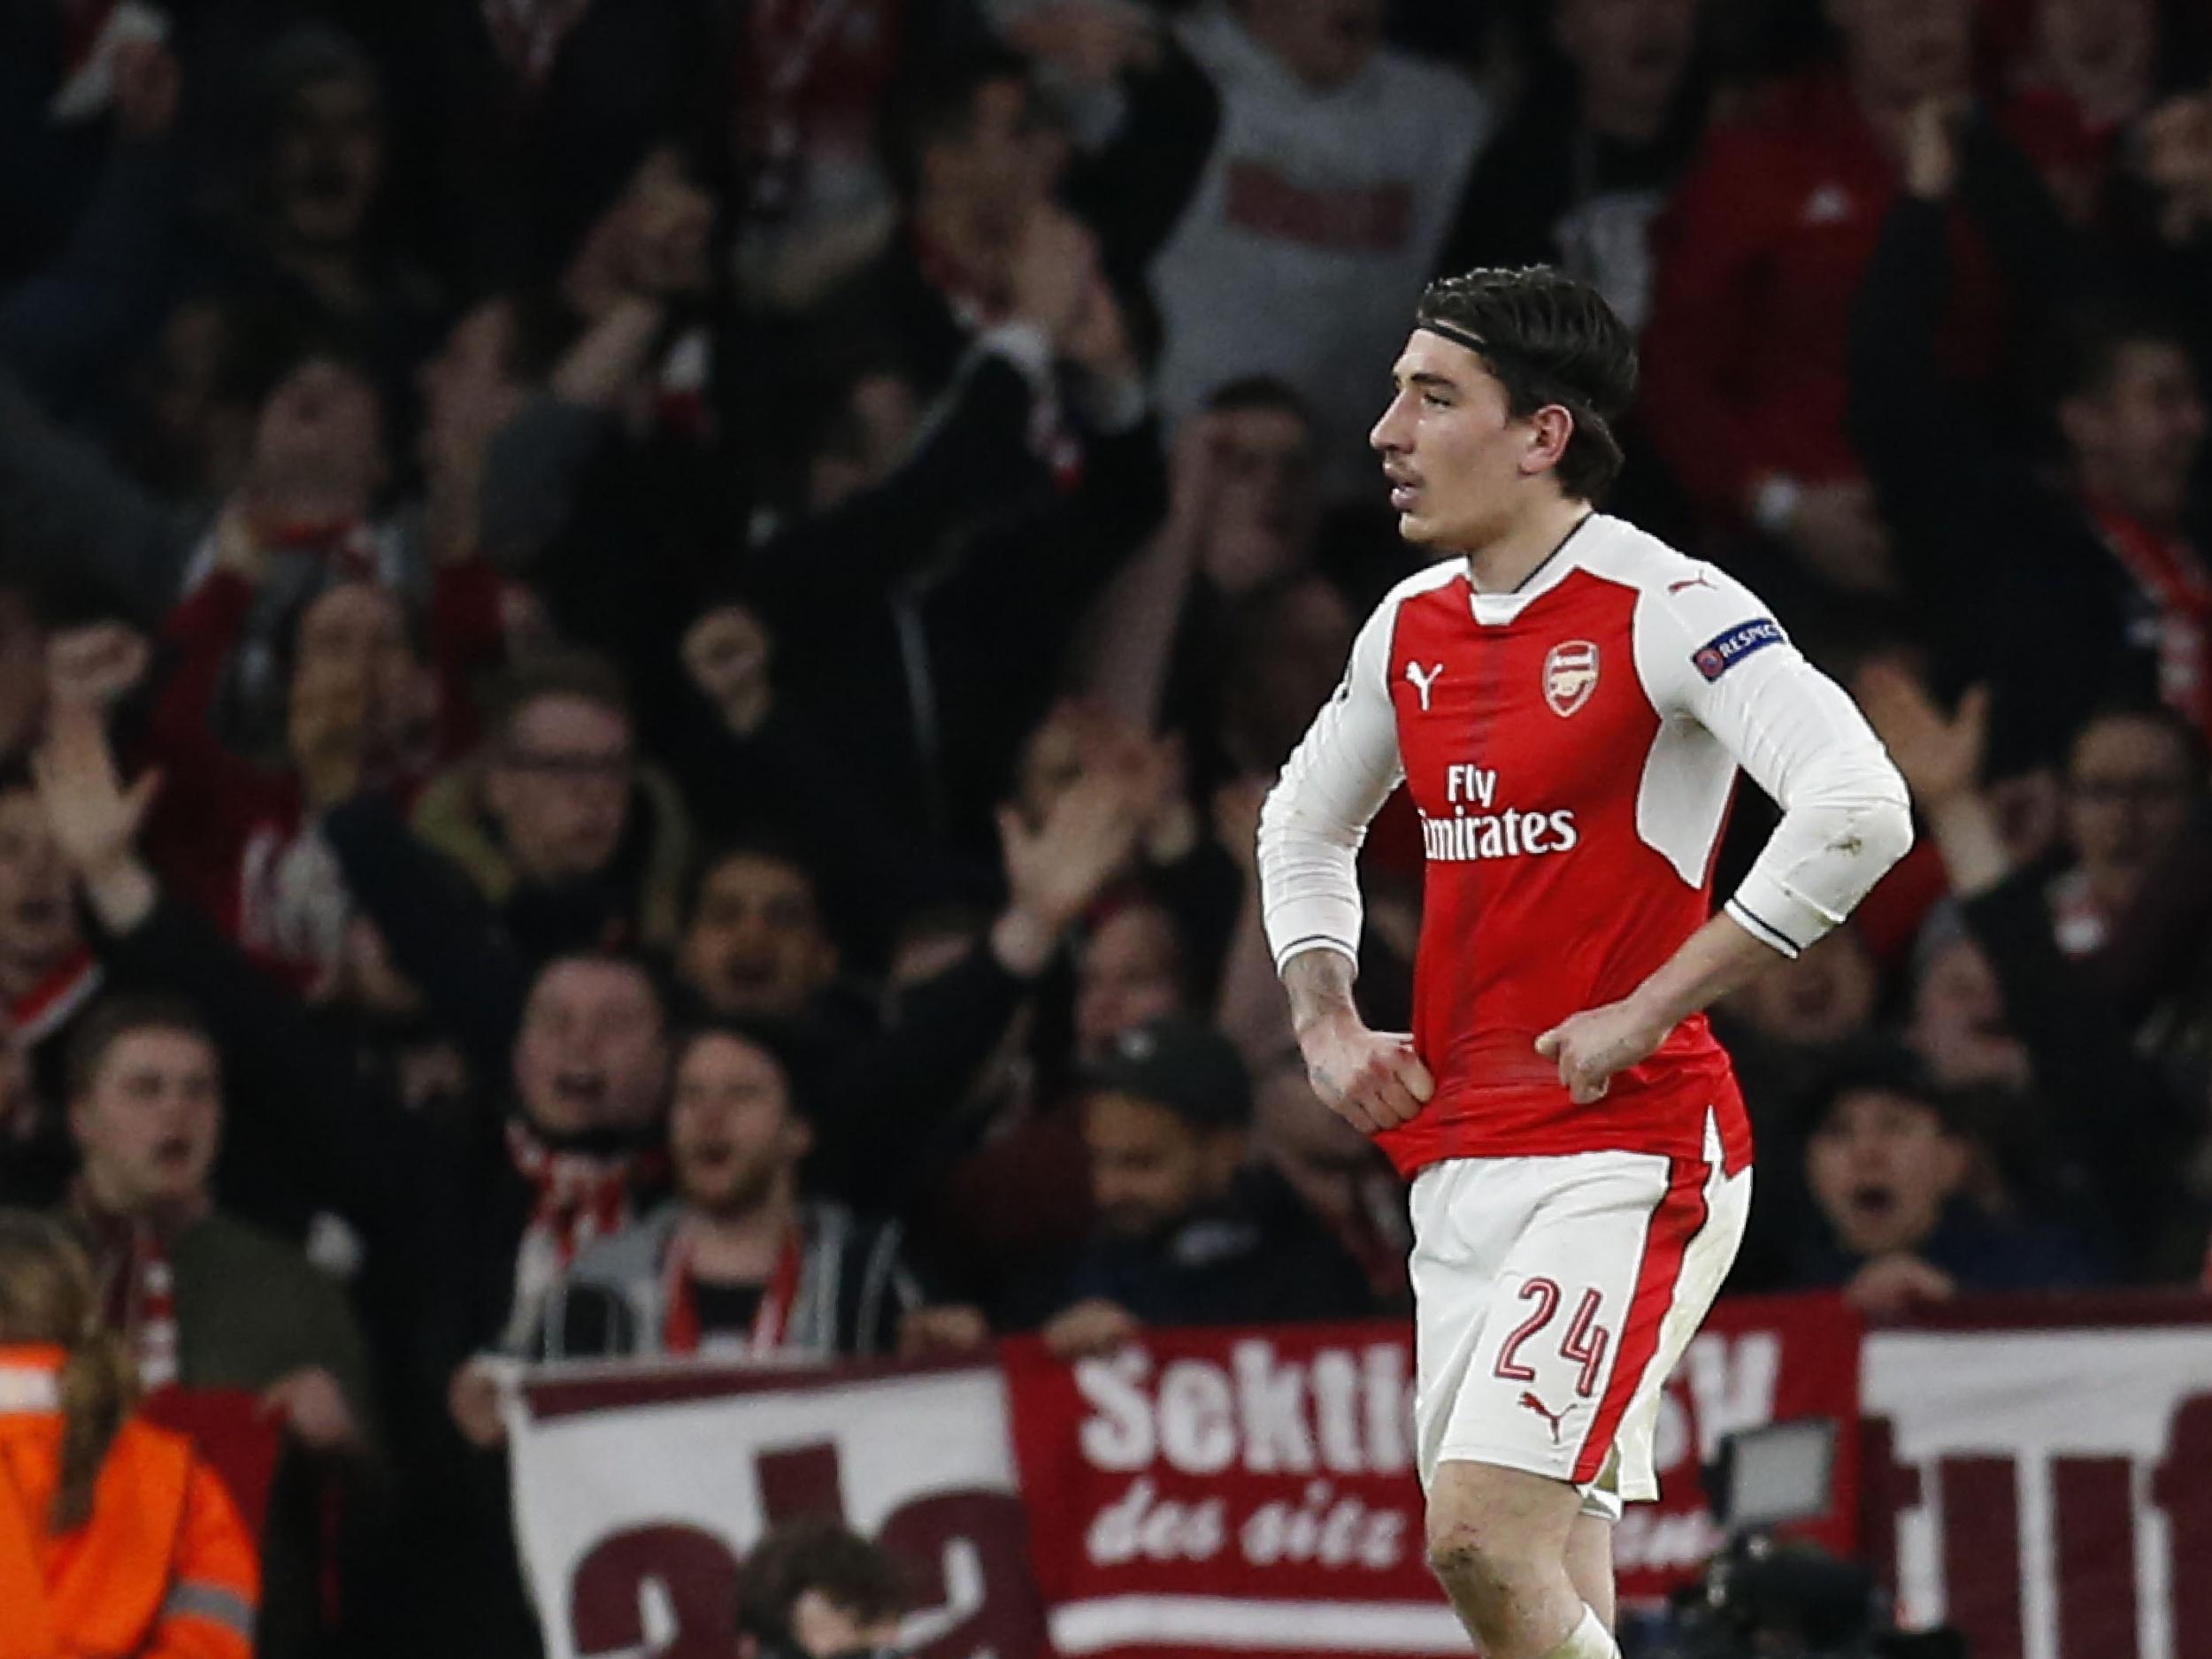 Bellerin was 'hurt' seeing so many fans leave so early